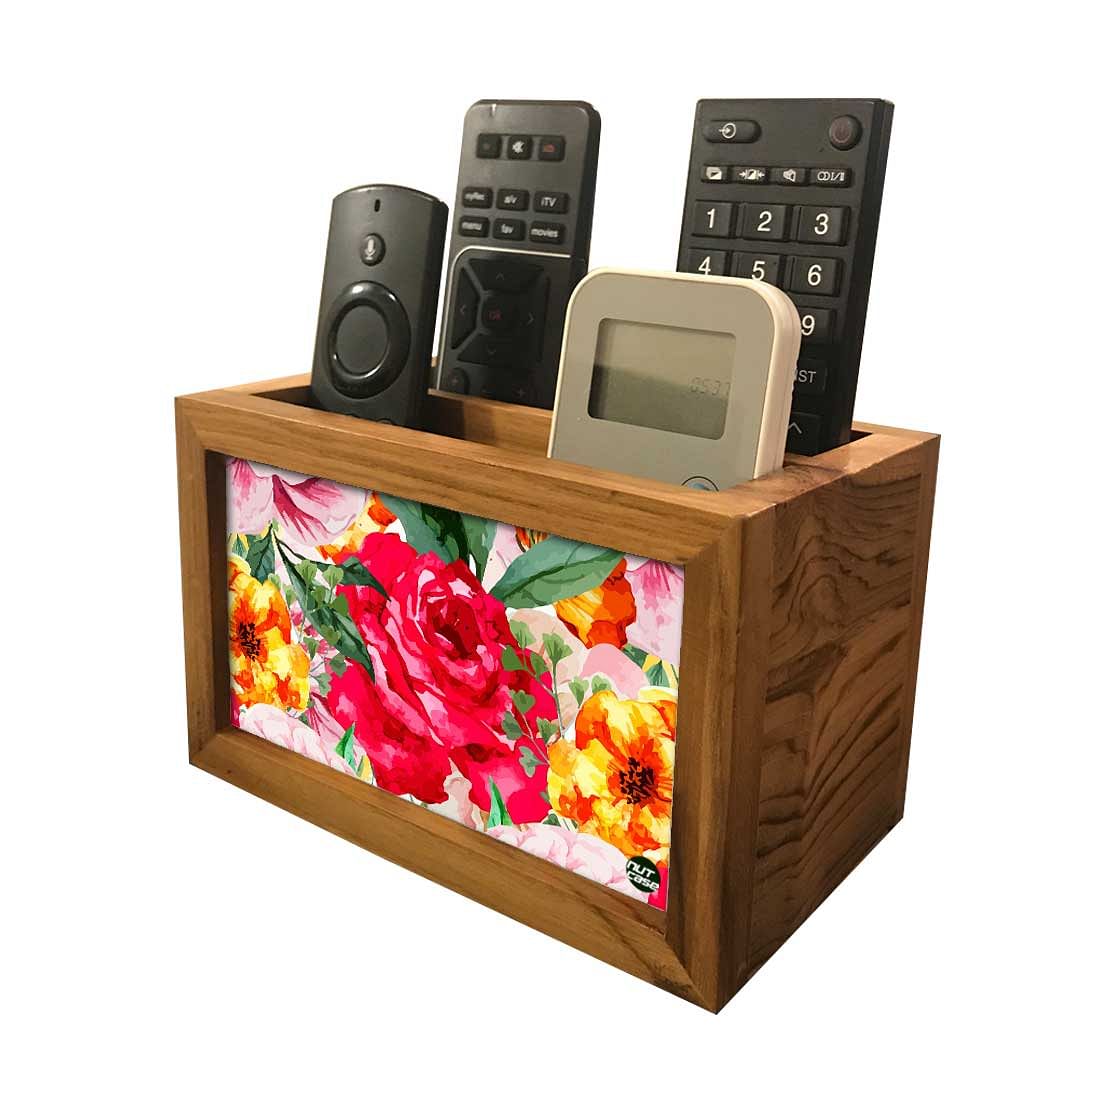 New Stylish Remote Control Holder For TV / AC Remotes -  Colorful Rose Nutcase